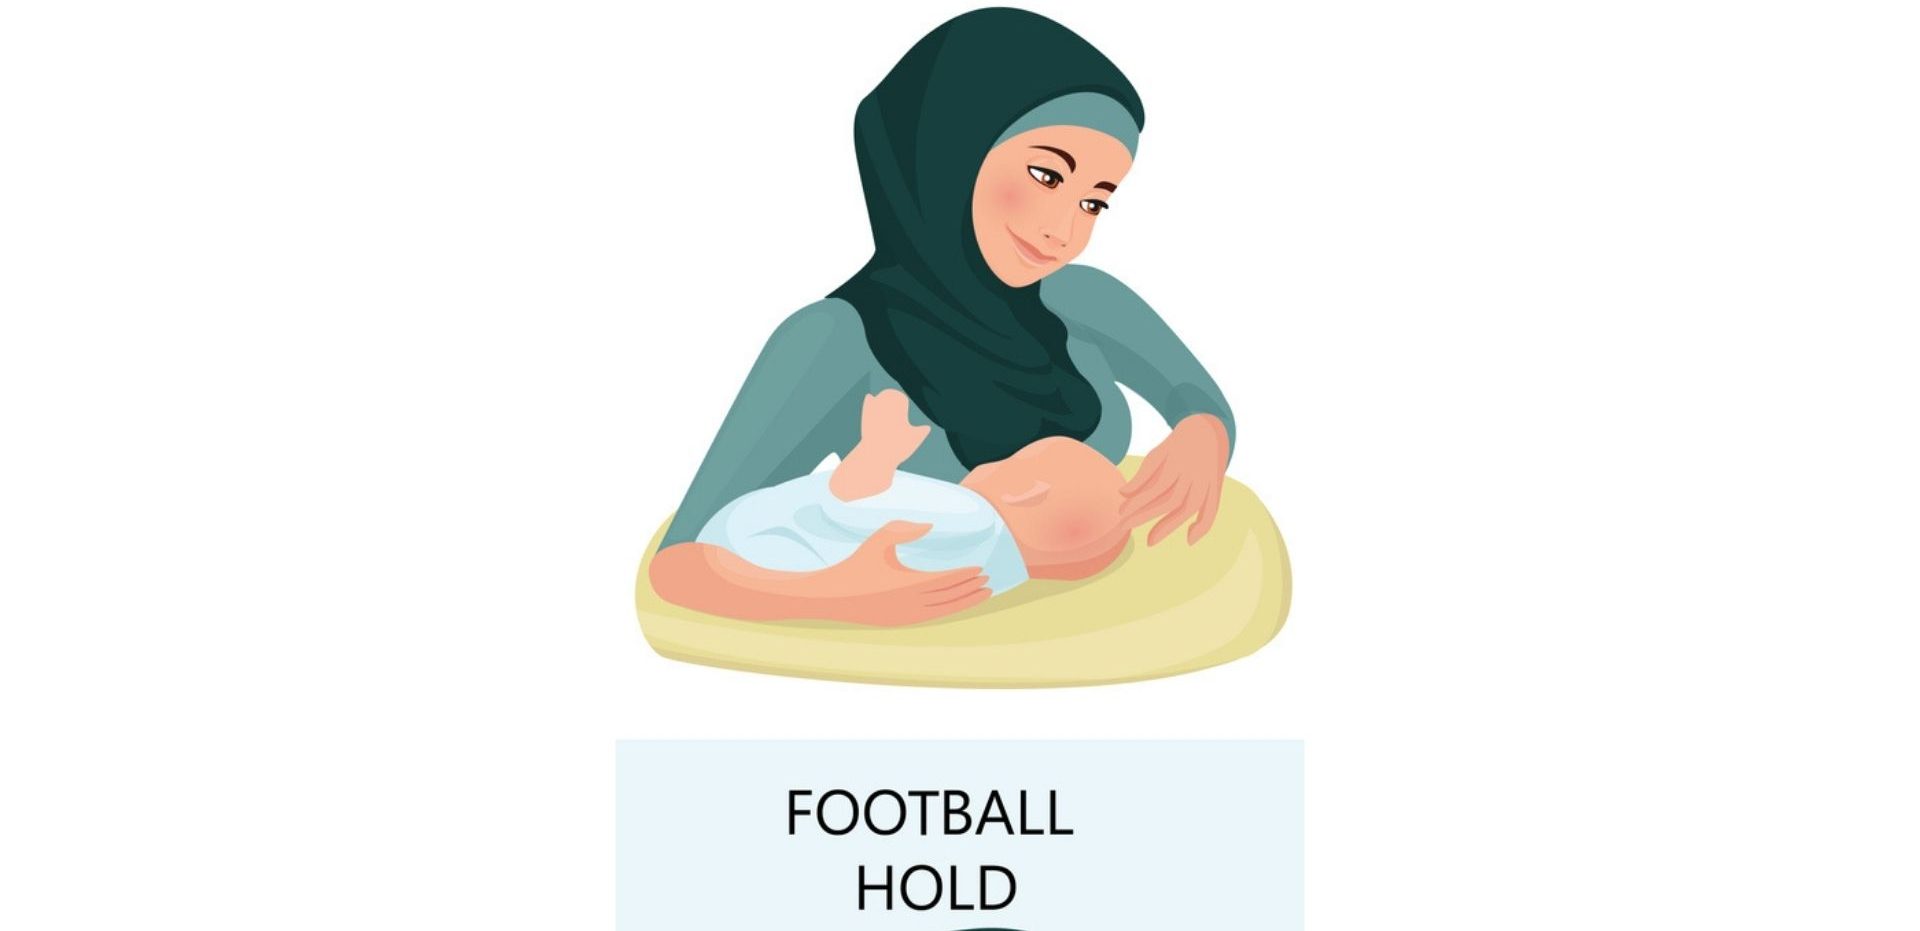 an infographic showing breastfeeding position four - a woman cradling her baby in the football hold